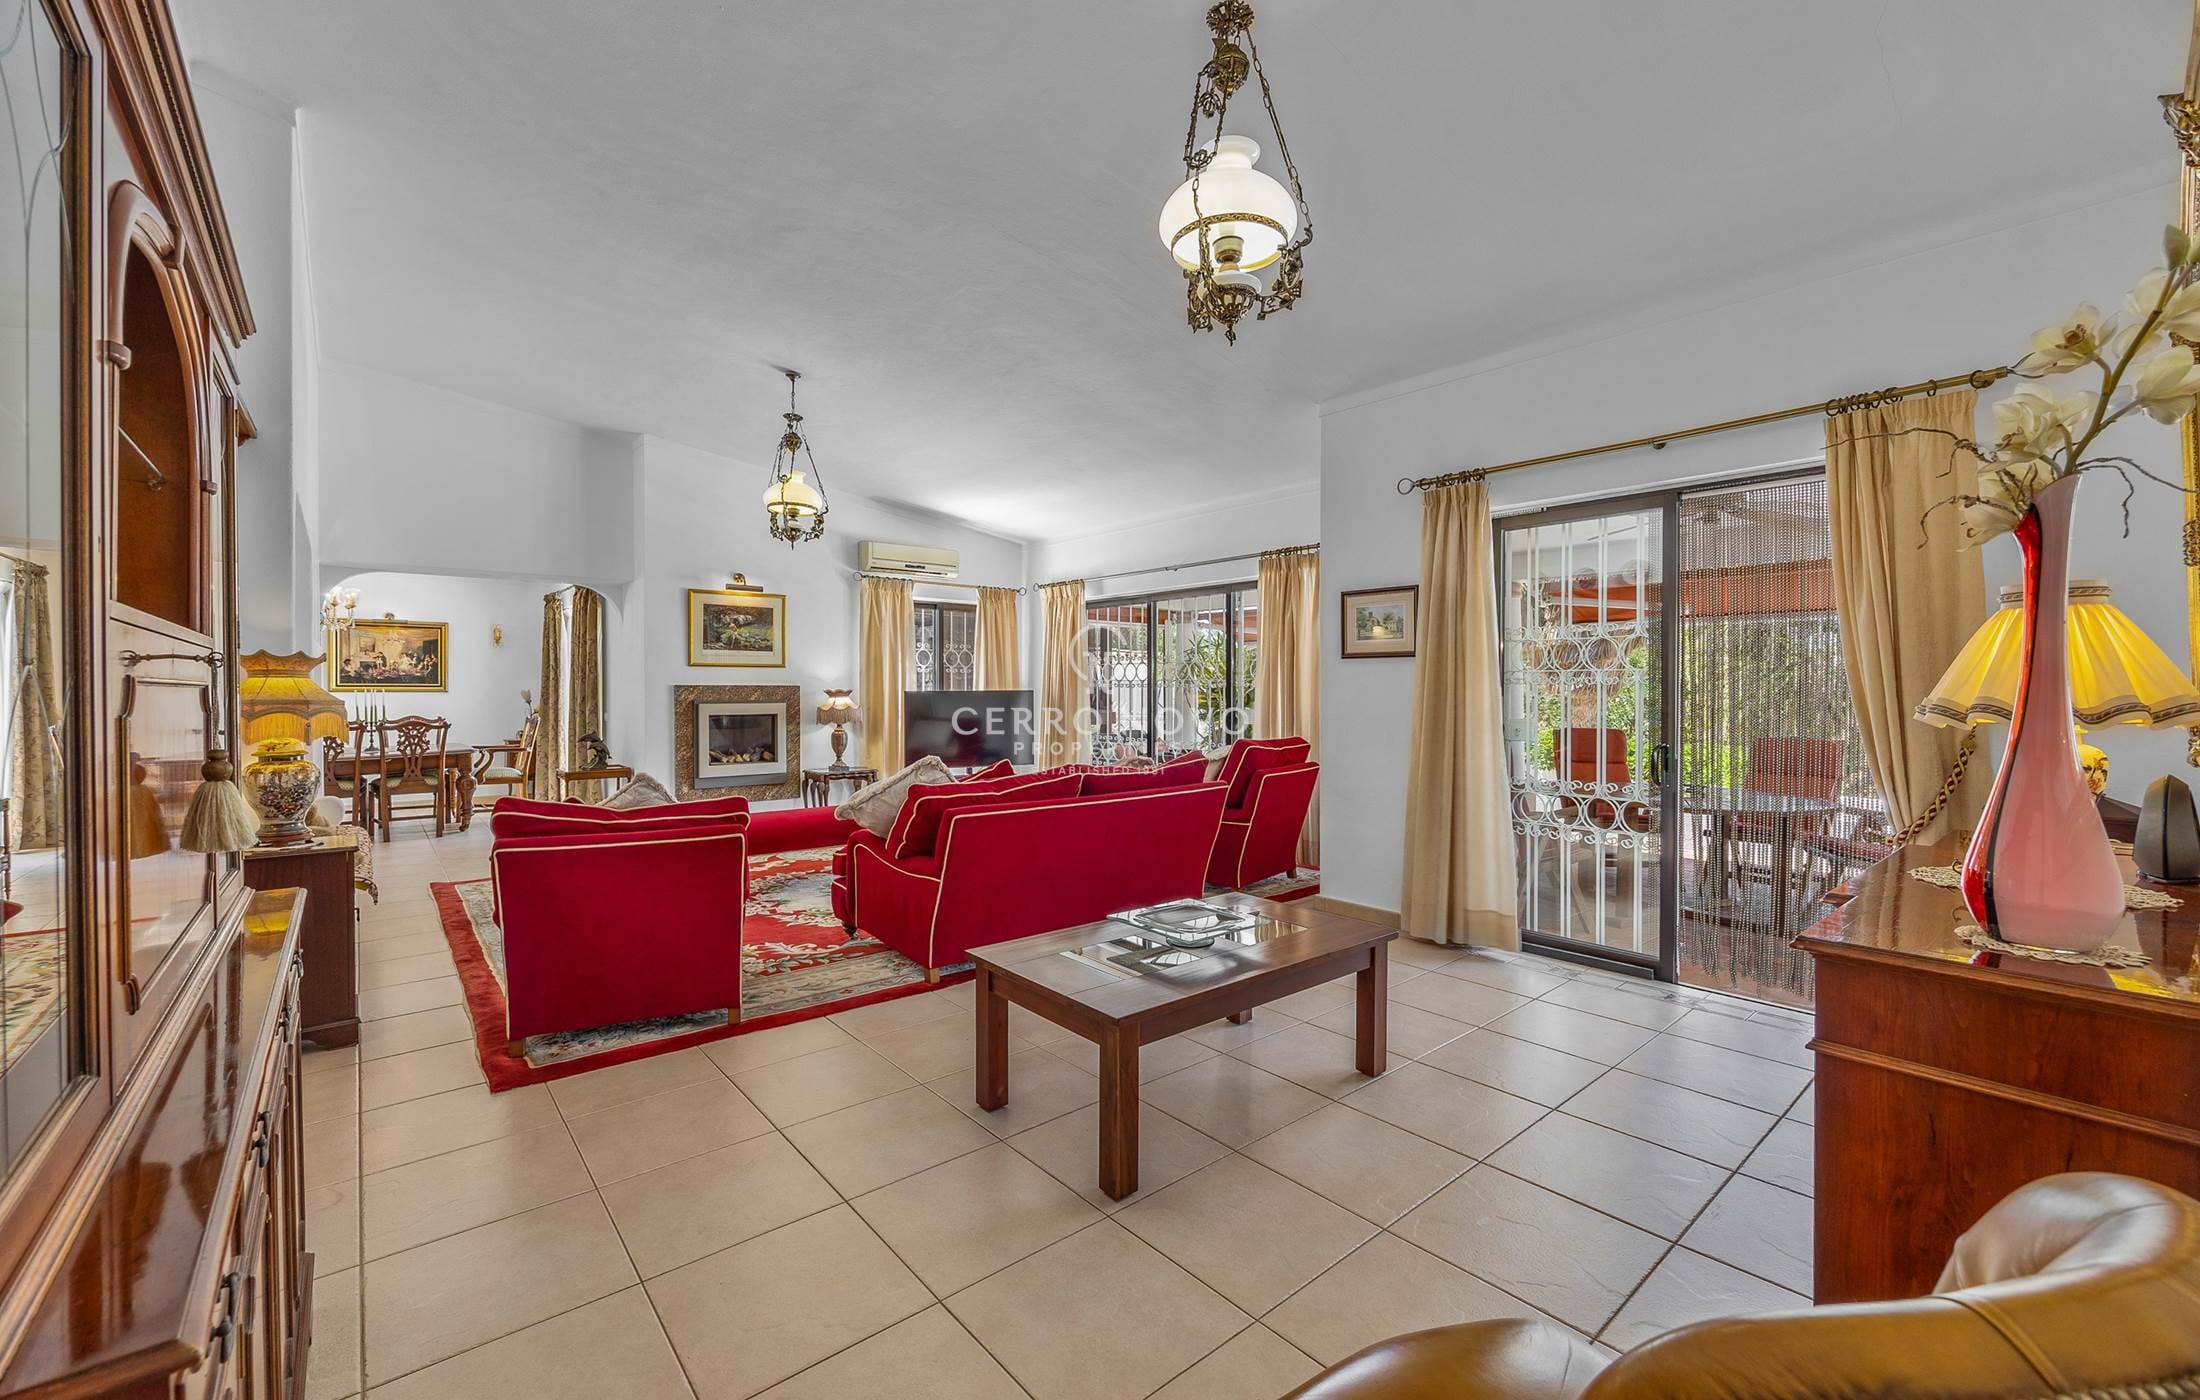 Superbly presented, large family home with pool and garden in an enviable location